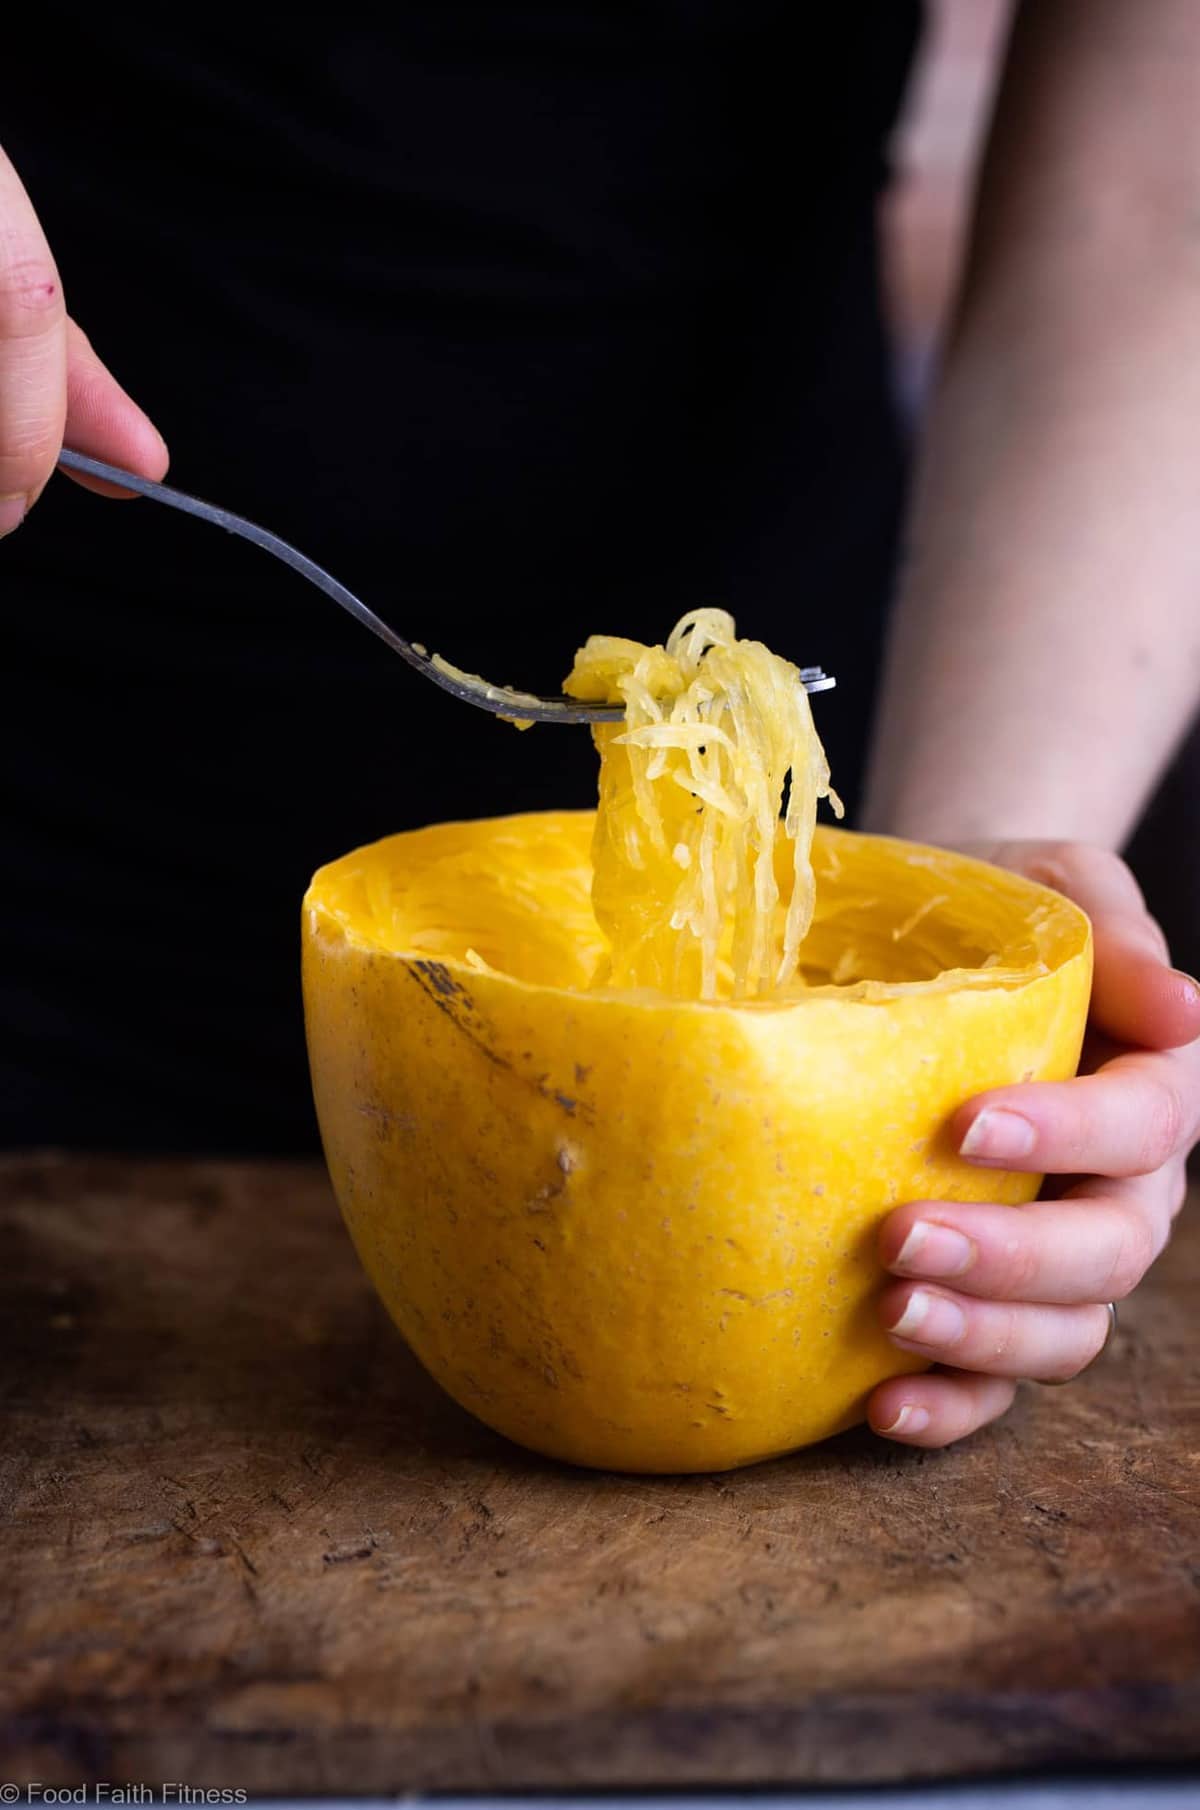 Instant Pot Spaghetti Squash -Â Learn how to cookÂ Instant Pot Spaghetti Squash! It's super quick and easy, great for meal prep and low carb, gluten free, vegan and whole30 too! | #Foodfaithfitness | #Glutenfree #Paleo #Lowcarb #Keto #InstantPot